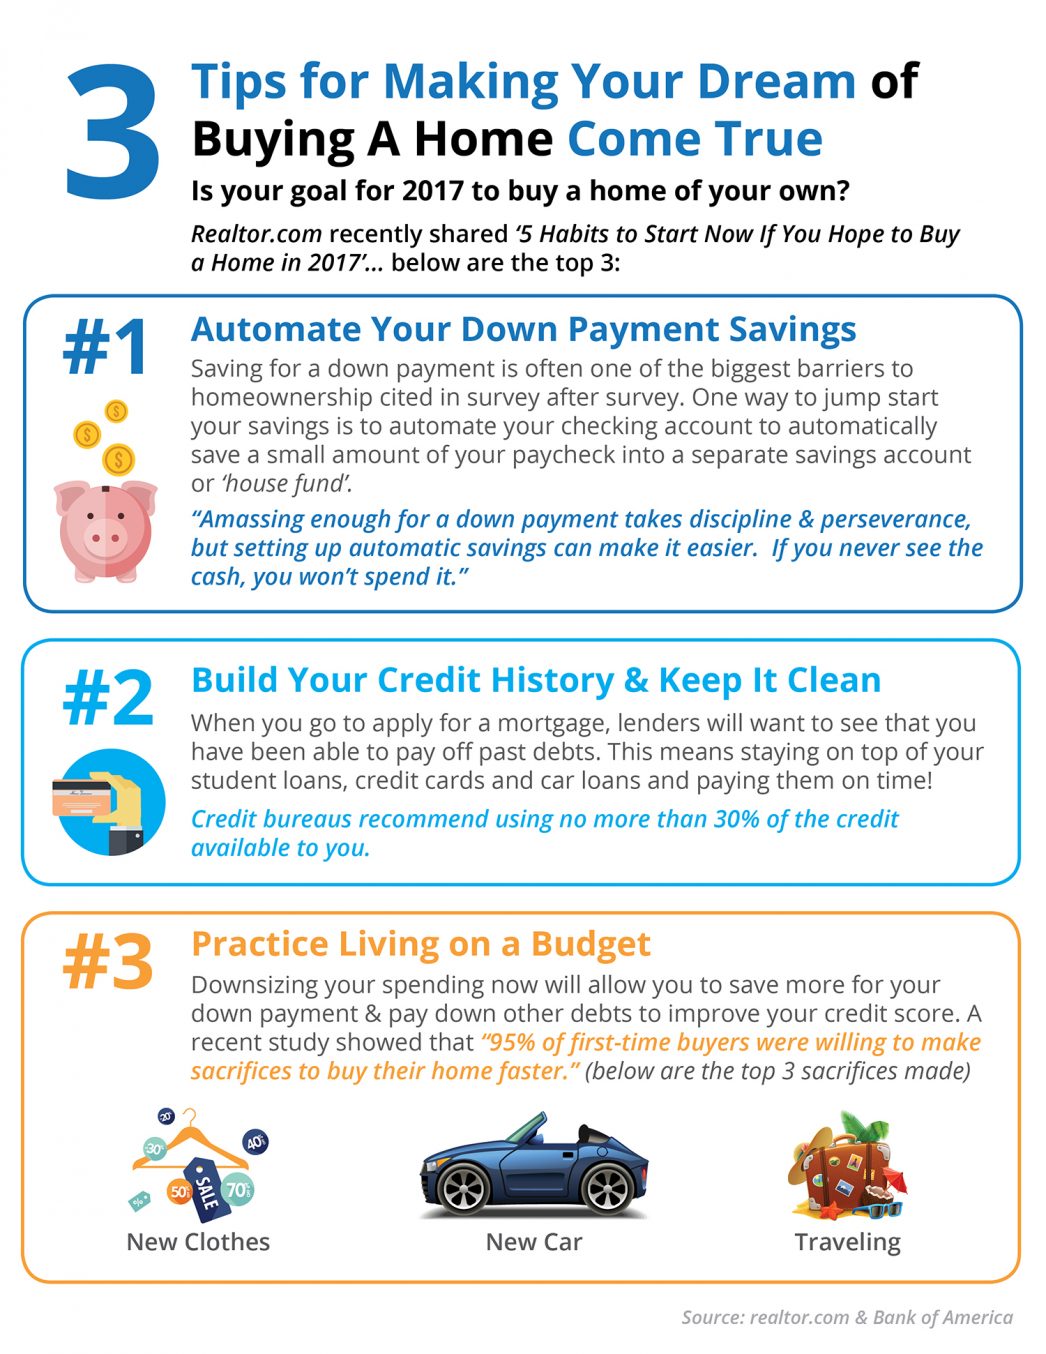 3 Tips for Making Your Dream of Buying a Home Come True [INFOGRAPHIC]